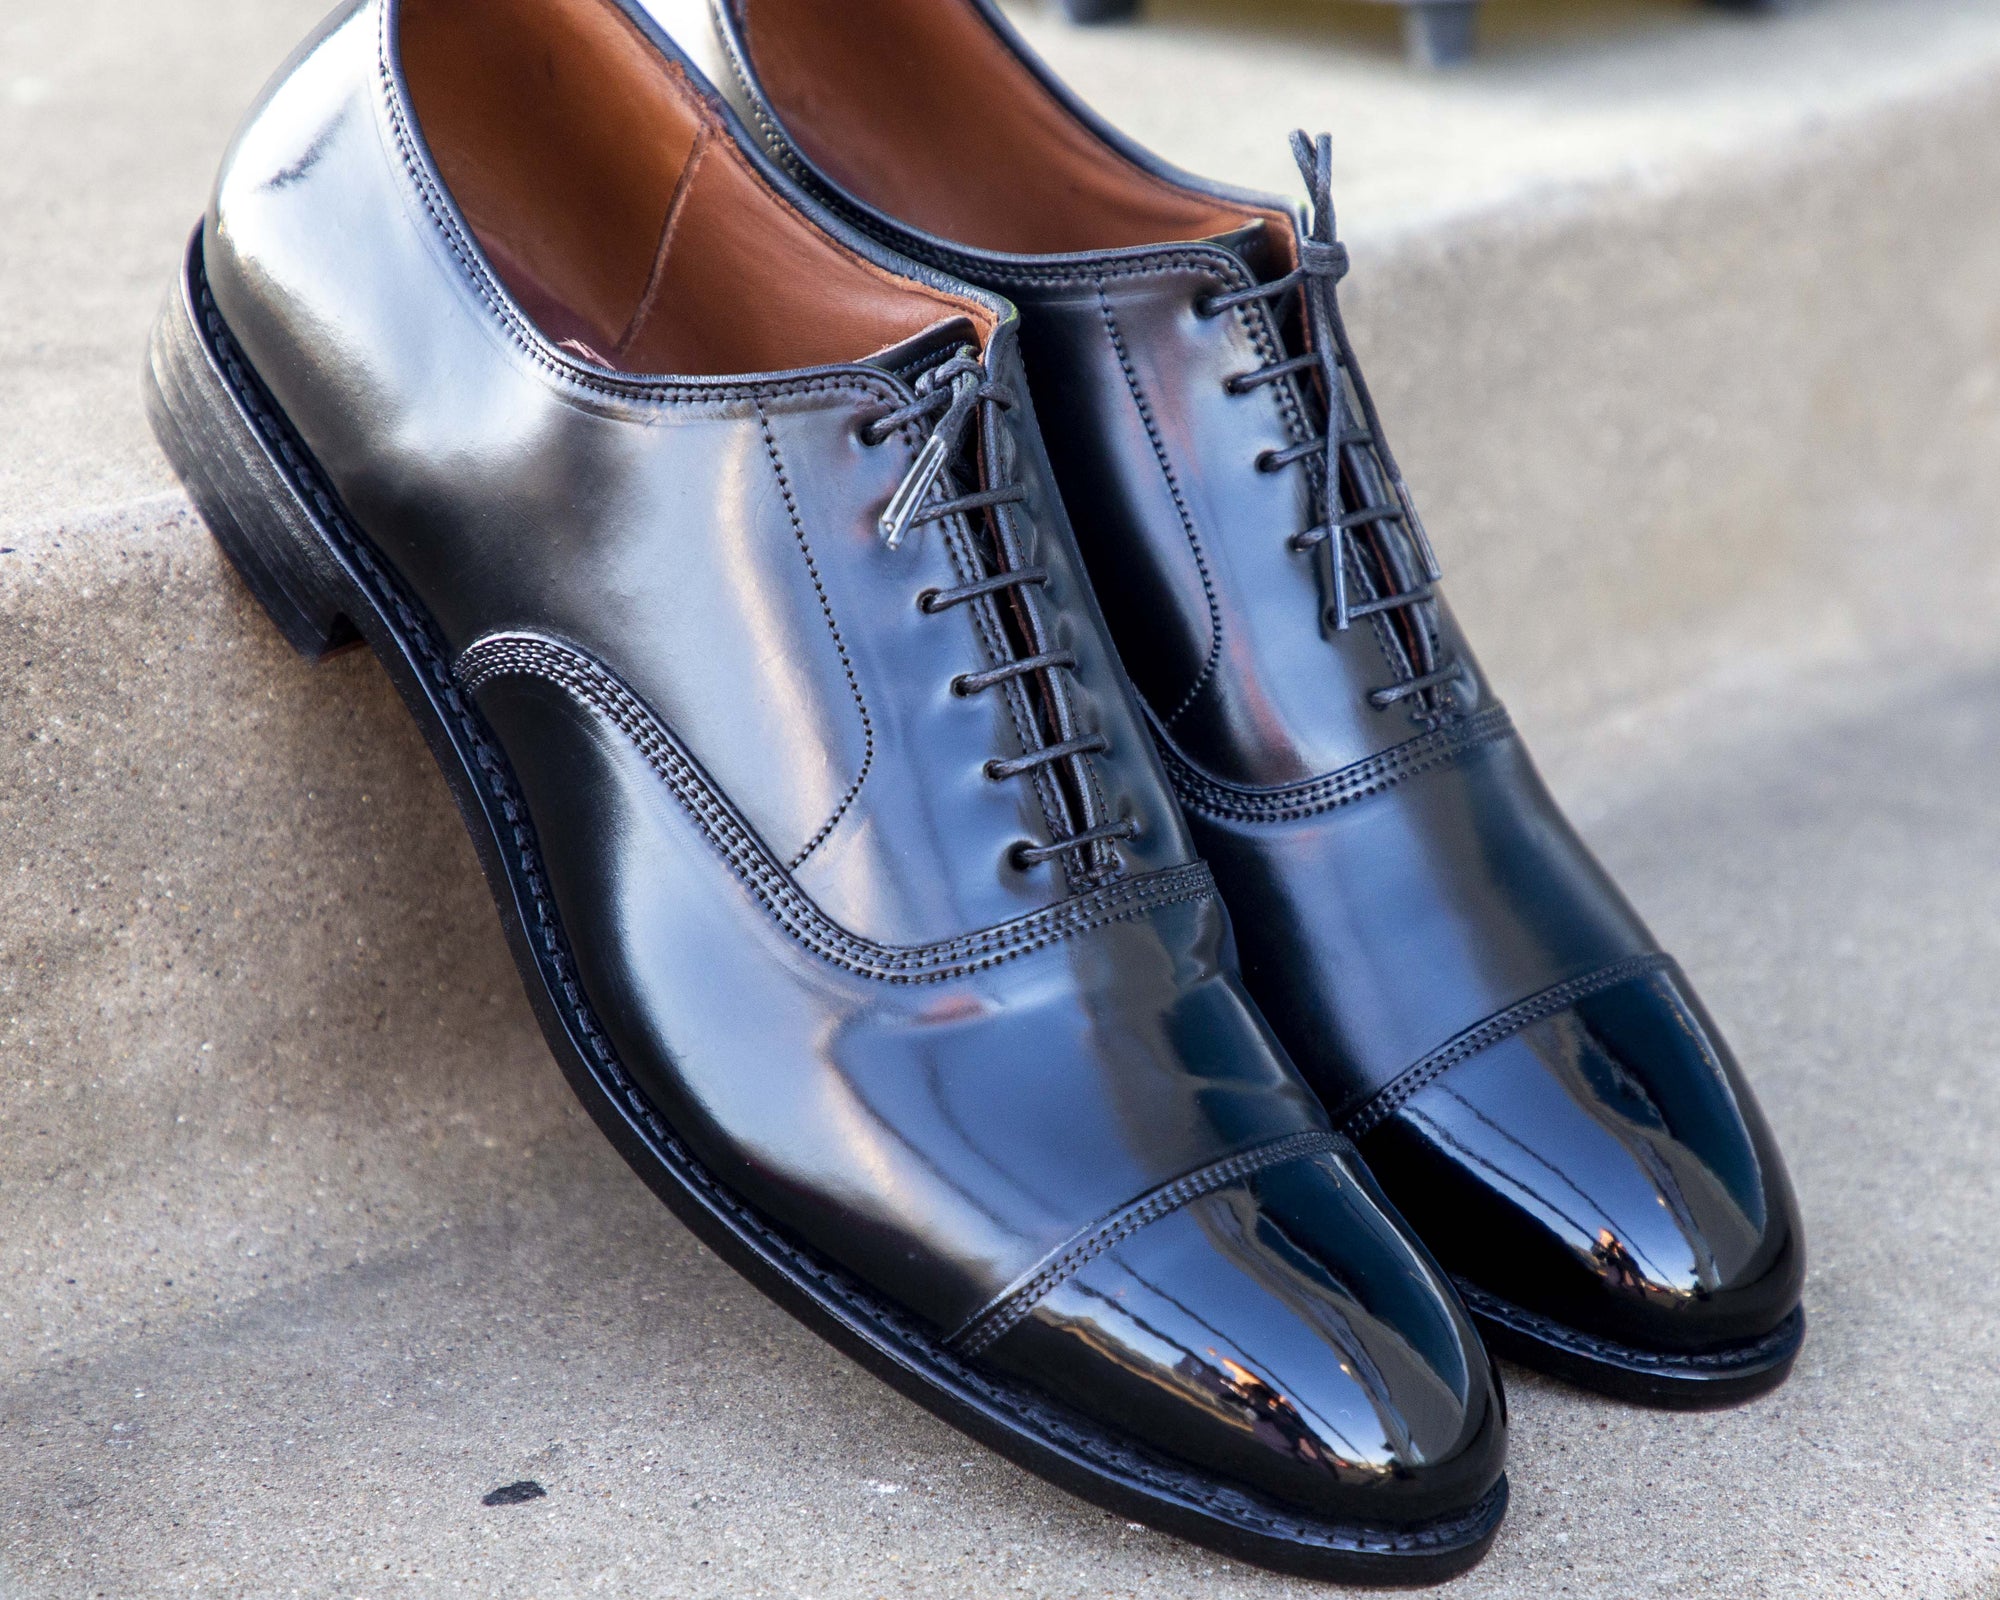 A pair of black oxford shoes shining after a High Shine Service by KirbyAllison.com.